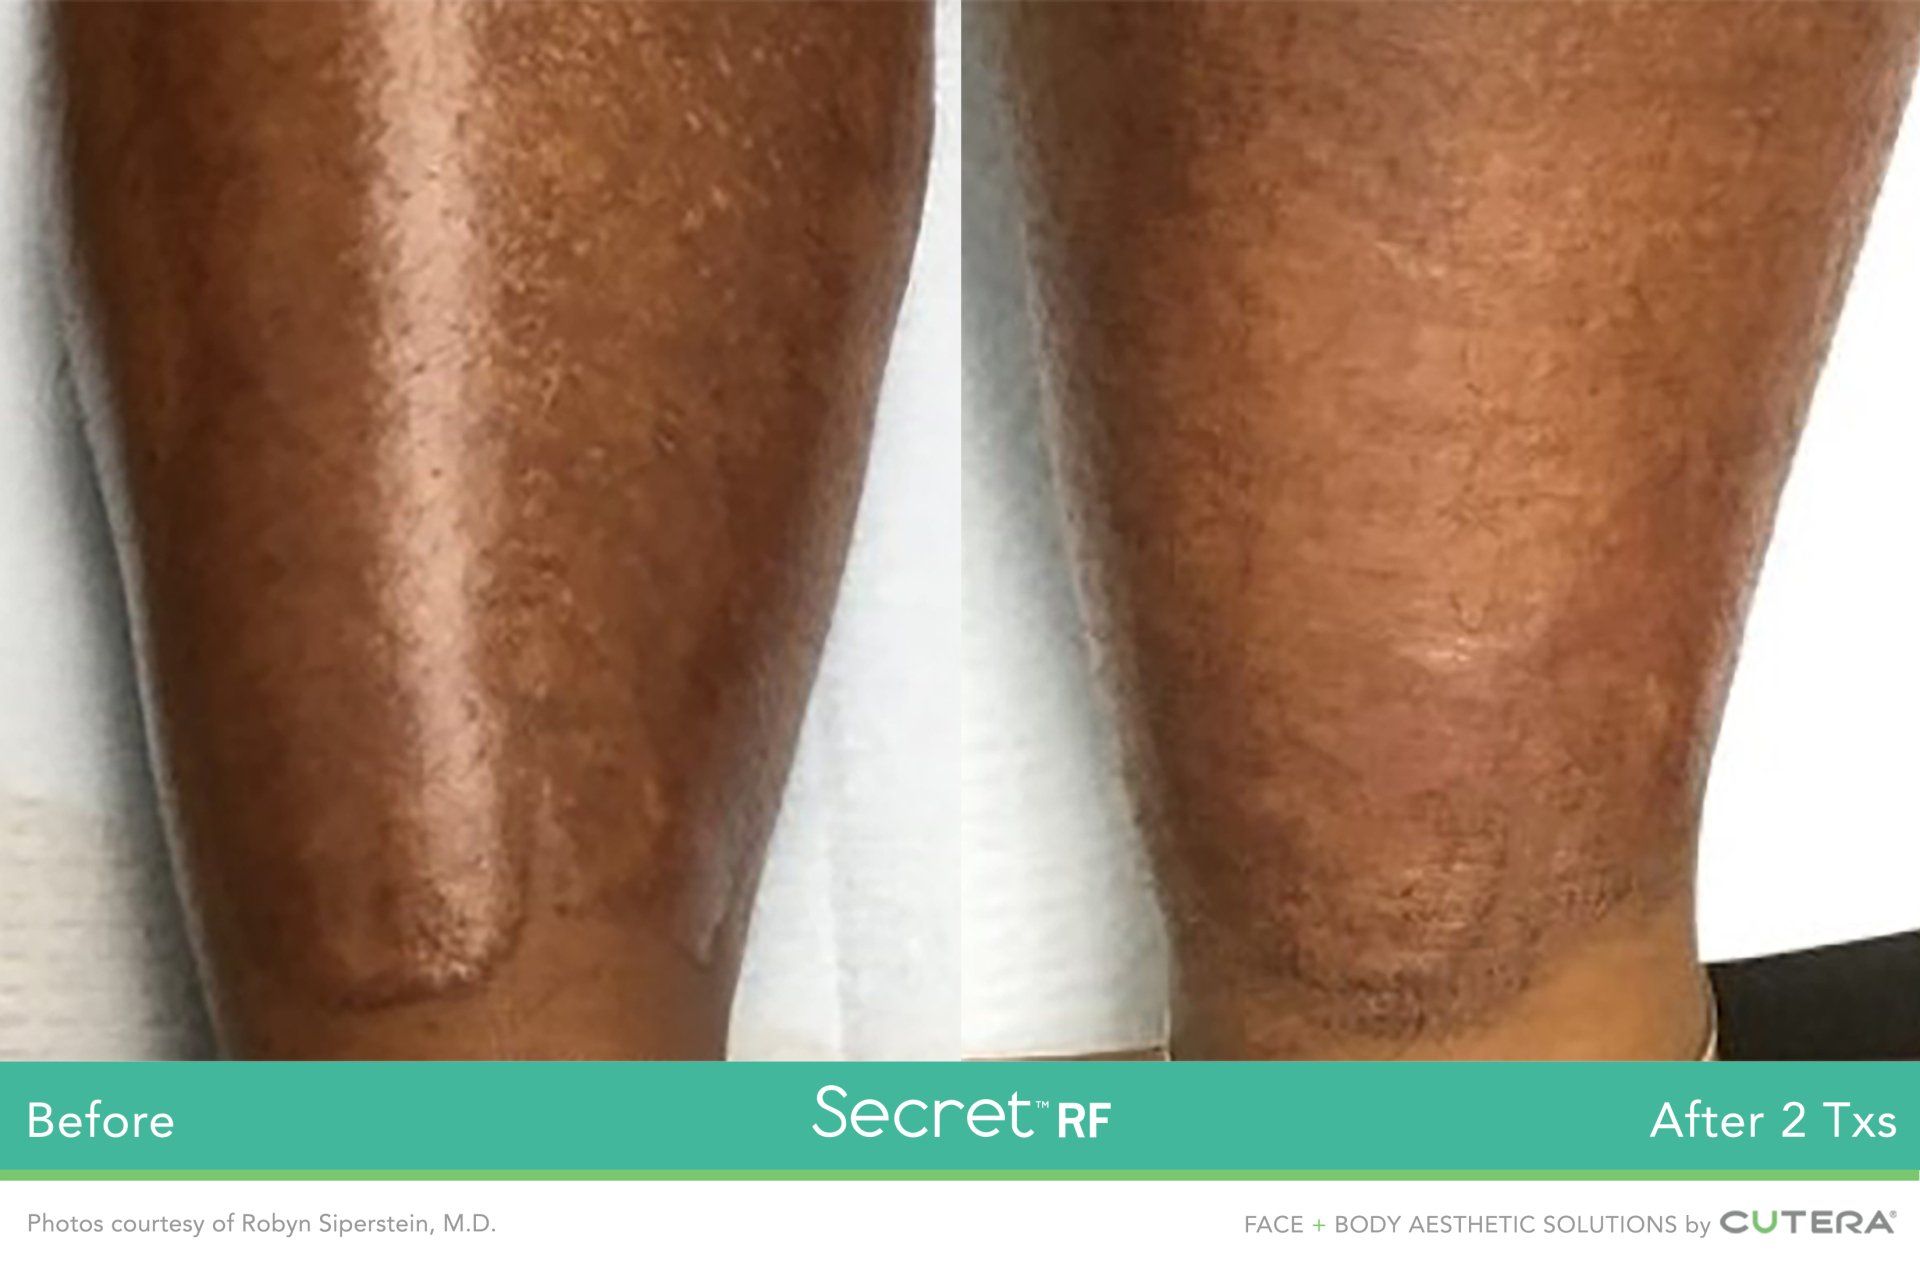 A before and after photo of a person 's legs.